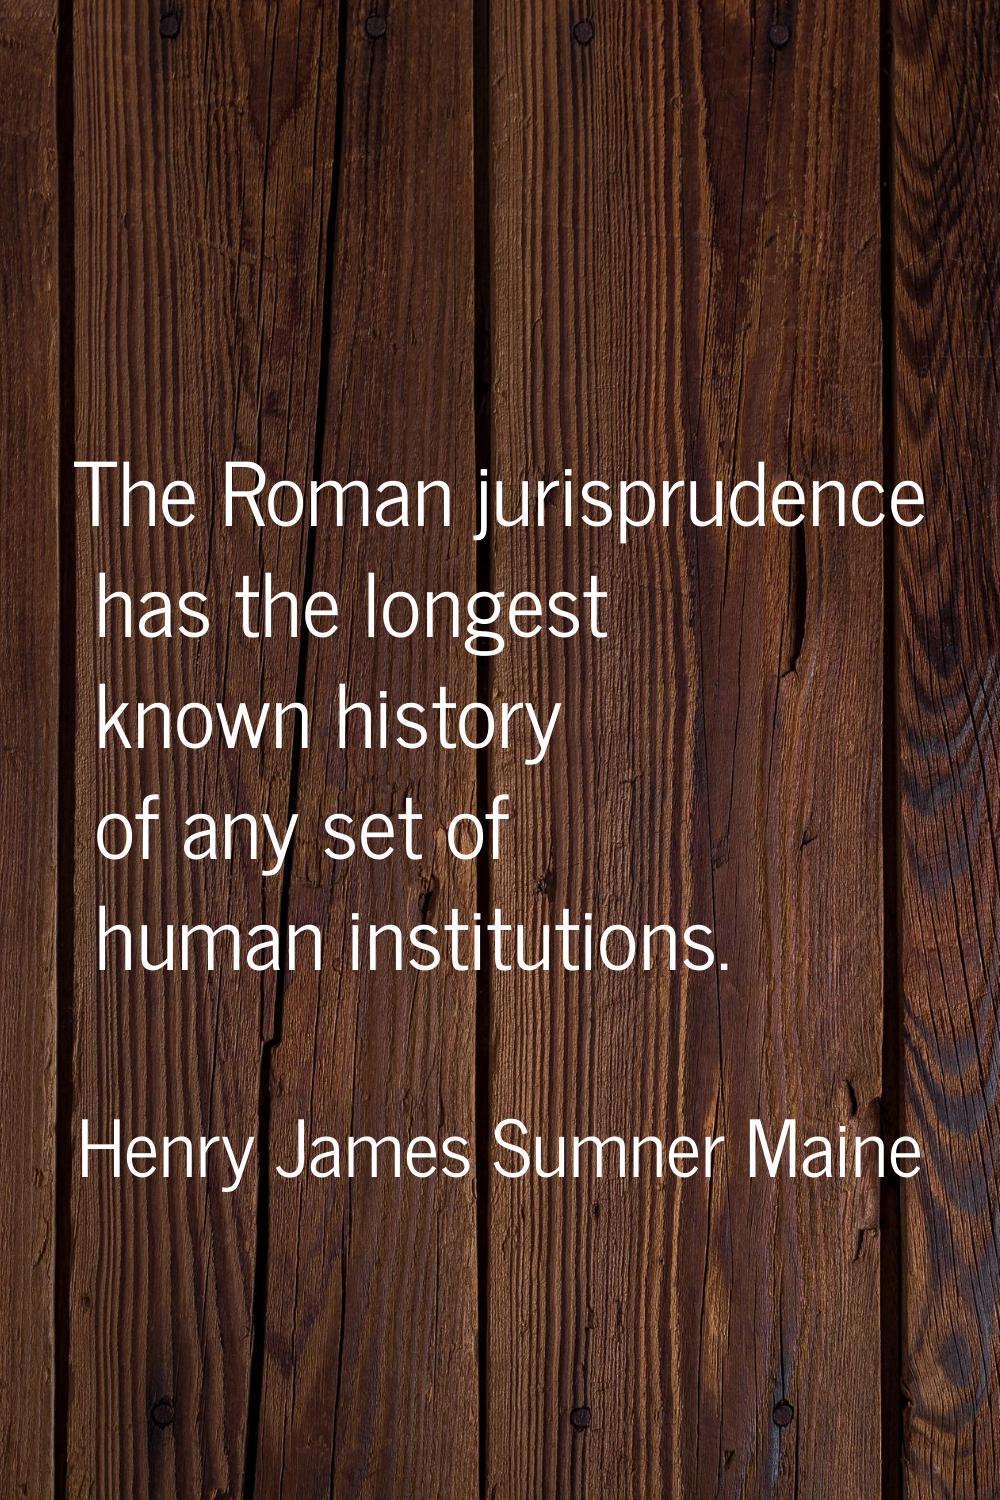 The Roman jurisprudence has the longest known history of any set of human institutions.